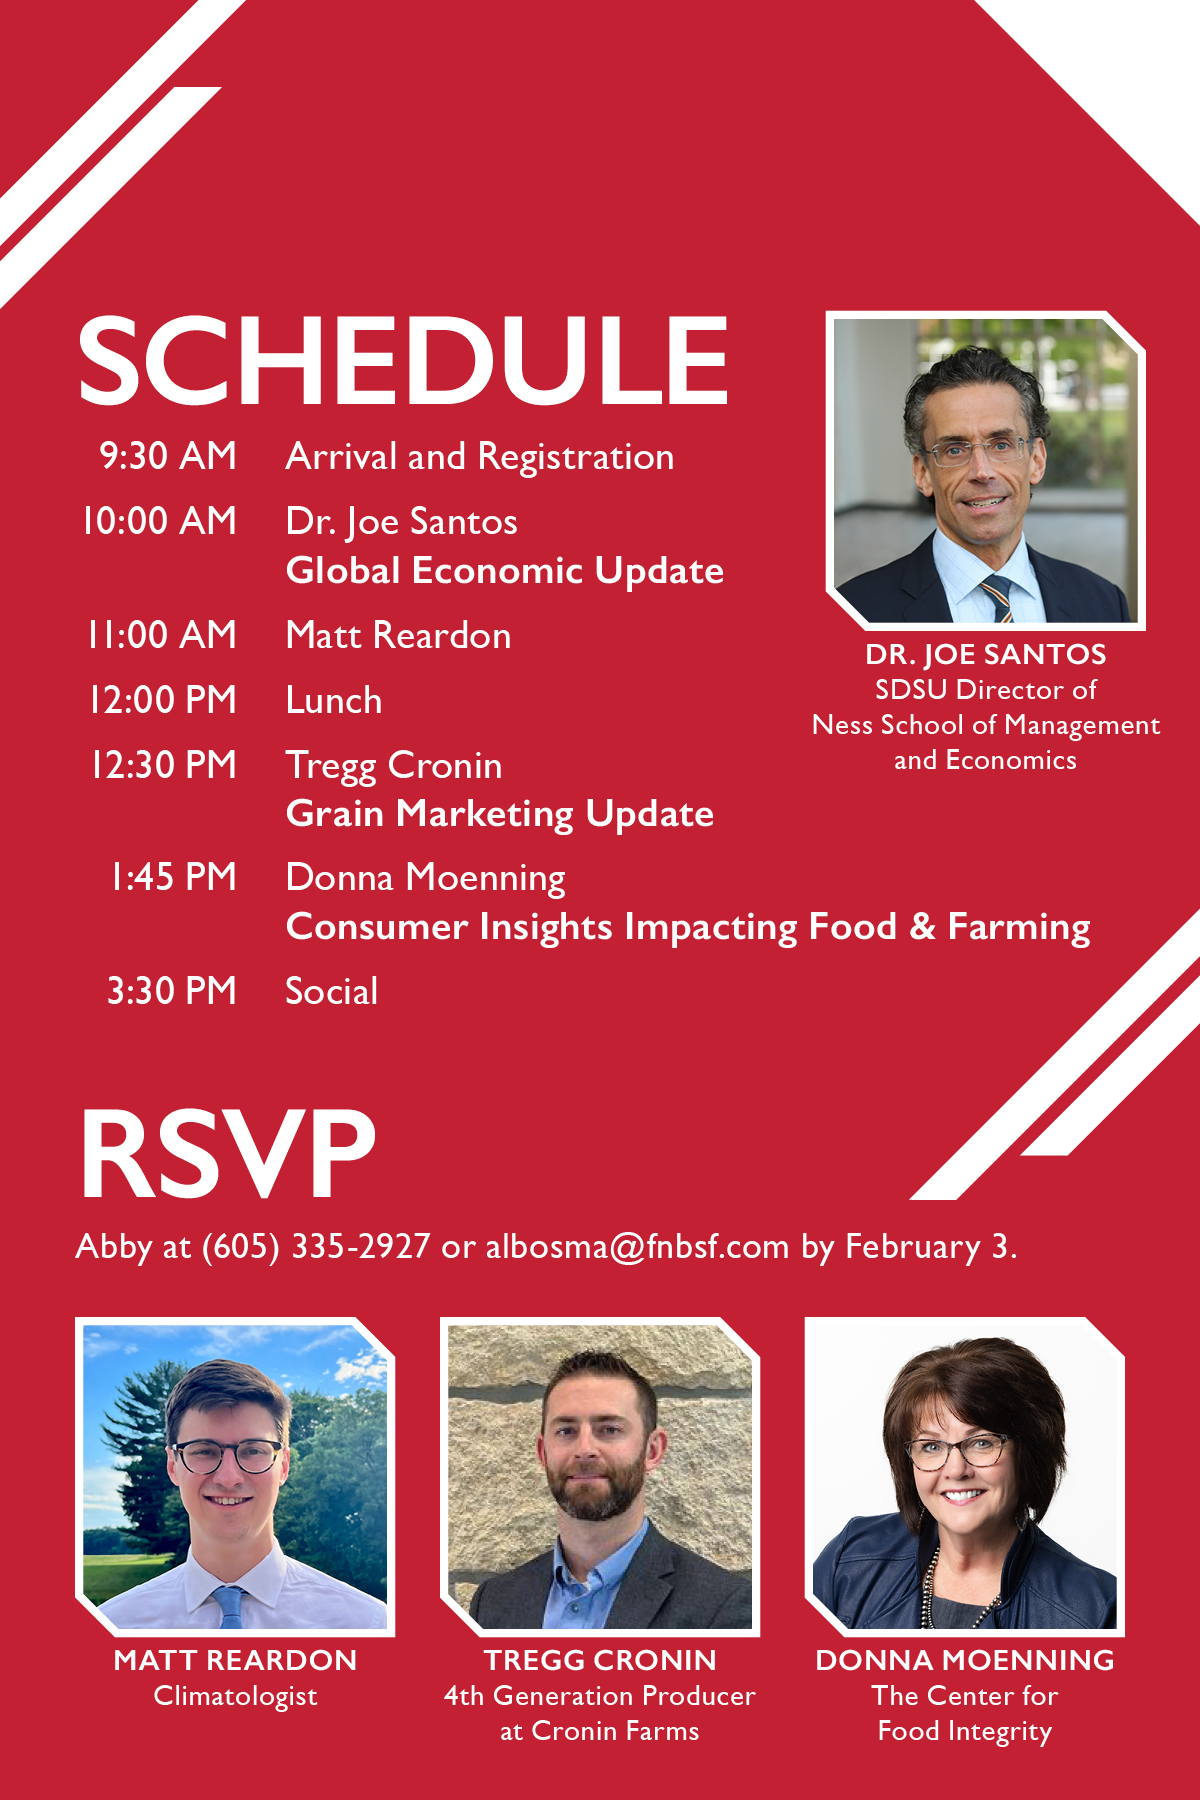 Schedule. 9:30 a.m. Arrival and registration. 10:00 a.m. Dr. Joe Santos, Global Economic Update. 11:00 a.m. Matt Reardon, Climatologist. 12:00 p.m. Lunch. 12:30 p.m. Tregg Cronin, Grain Marketing Update. 1:45 p.m. Donna Moenning, Consumer Insights Impacting Food & Farming. 3:30 p.m. Social. RSVP to Abby at (605) 335-2927 by February 3. 